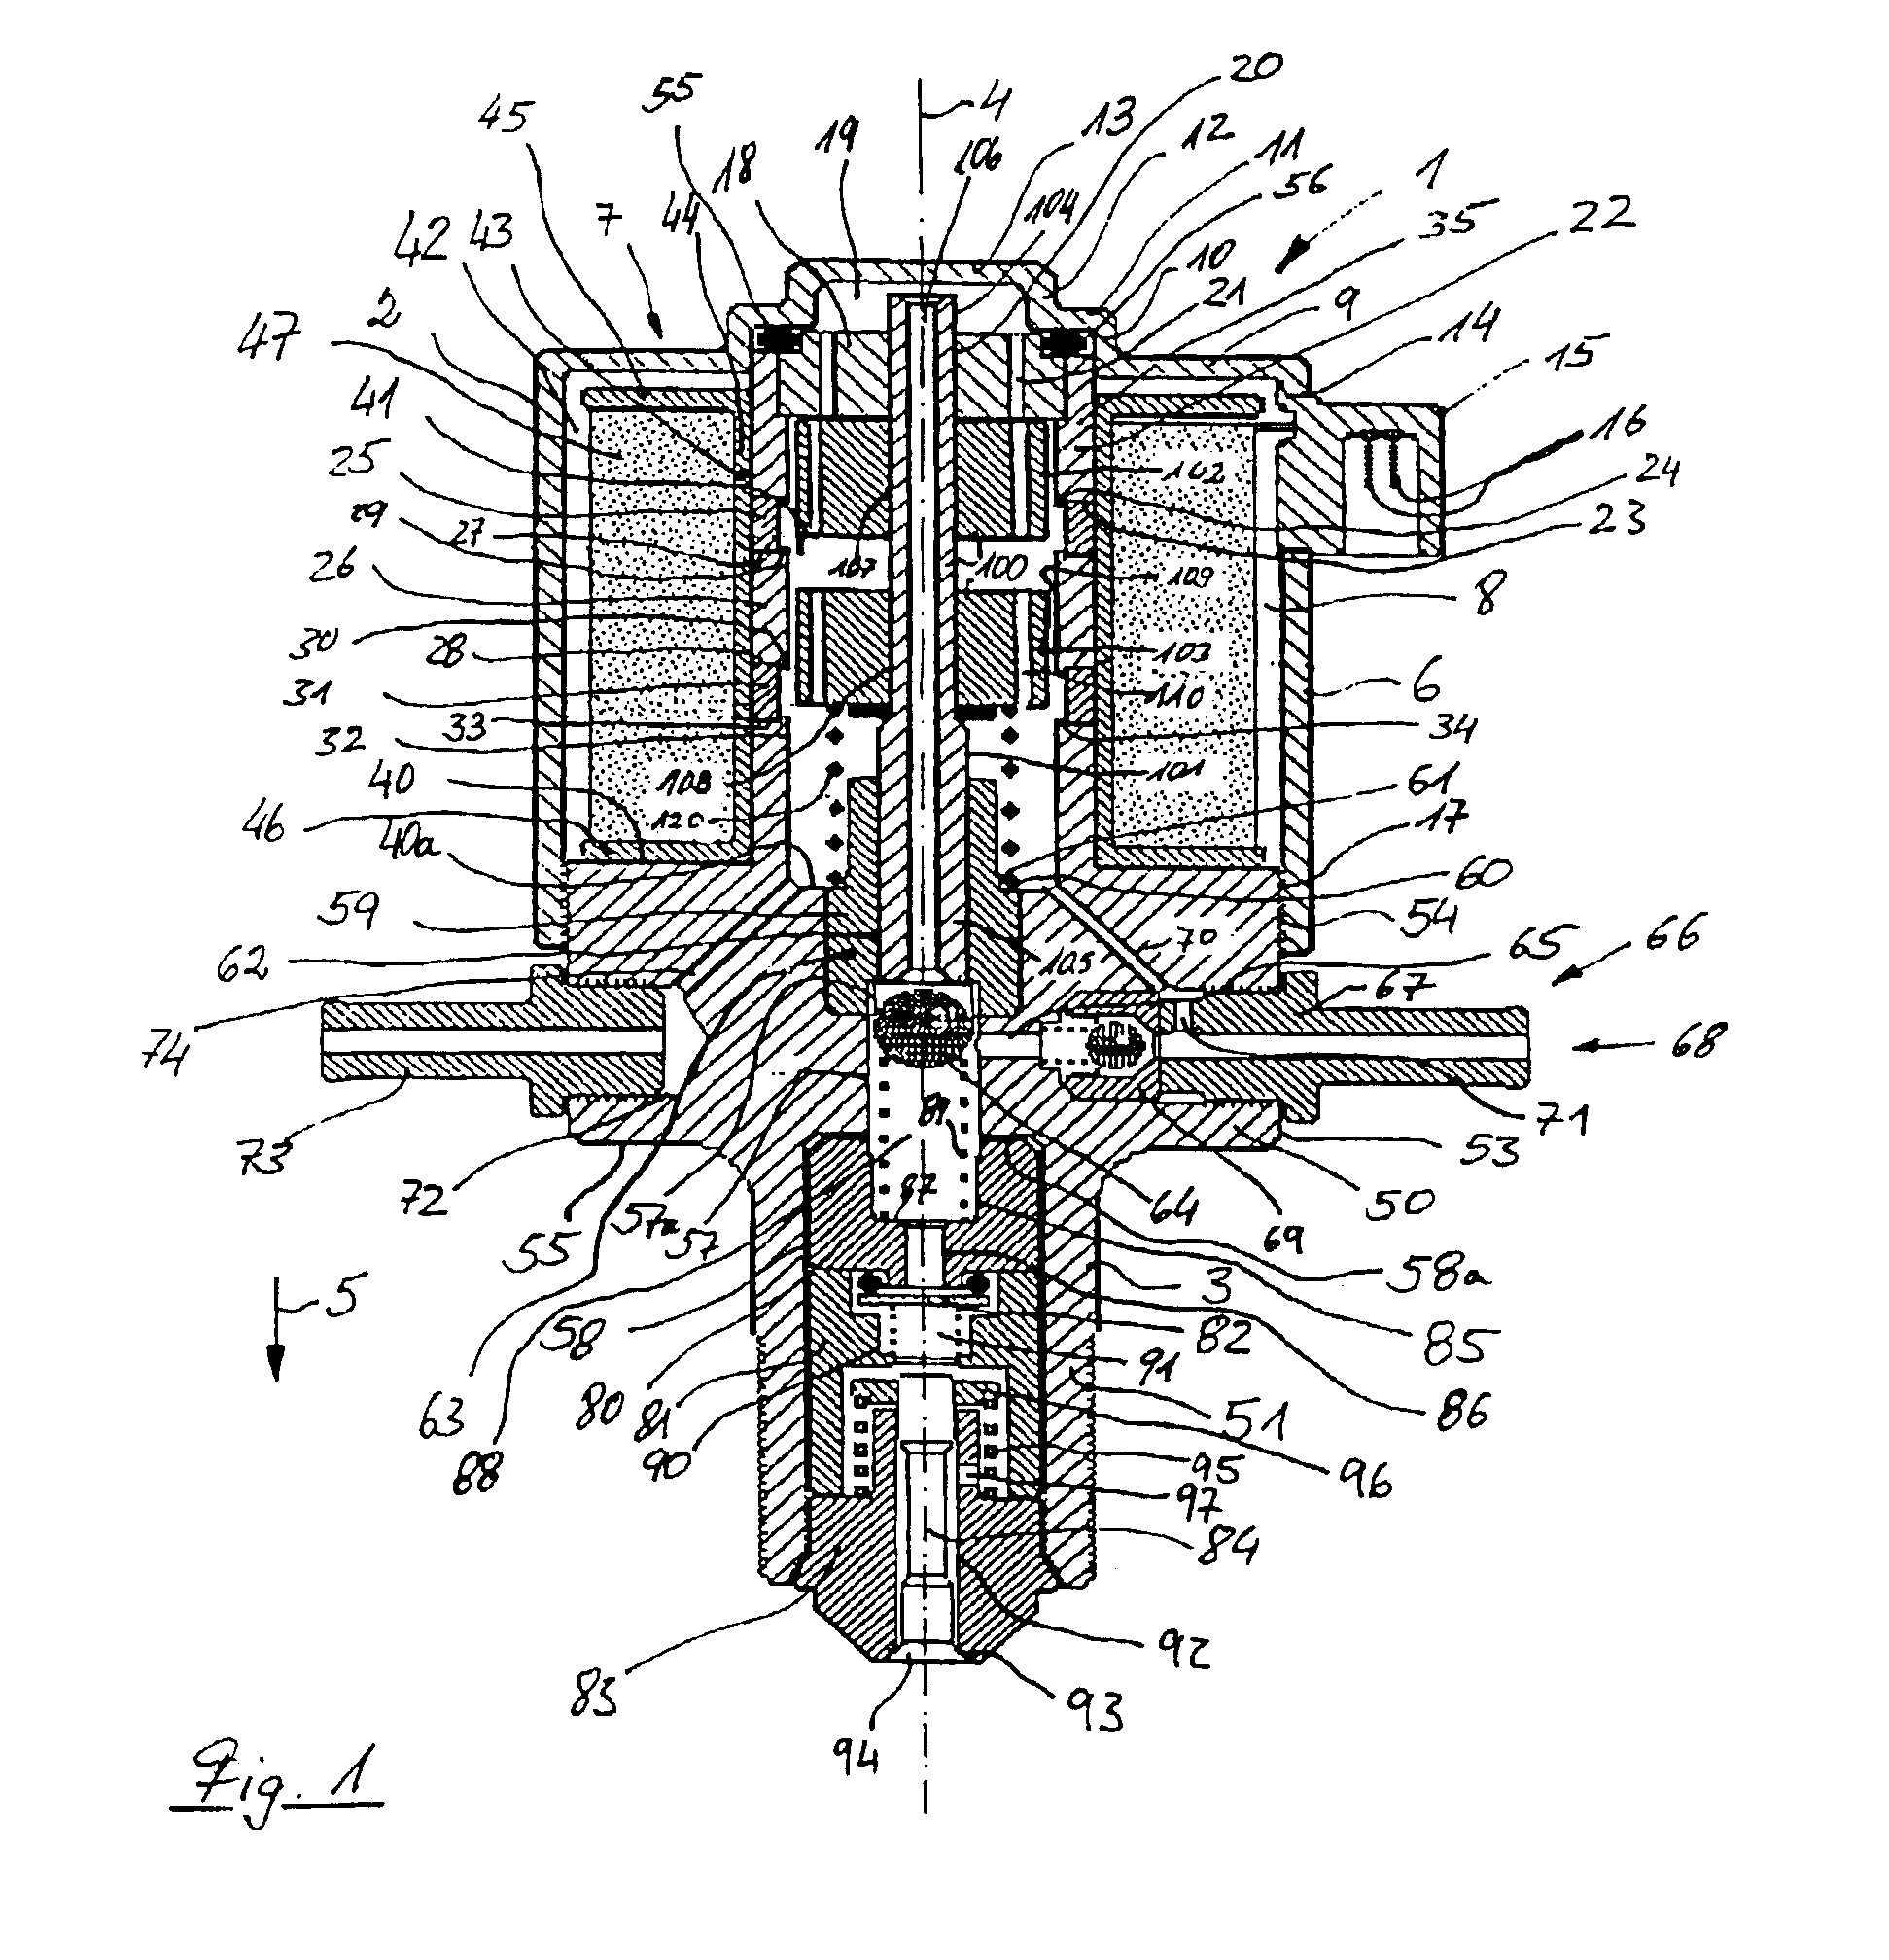 Device for delivering and/or spraying flowable media, especially fluids